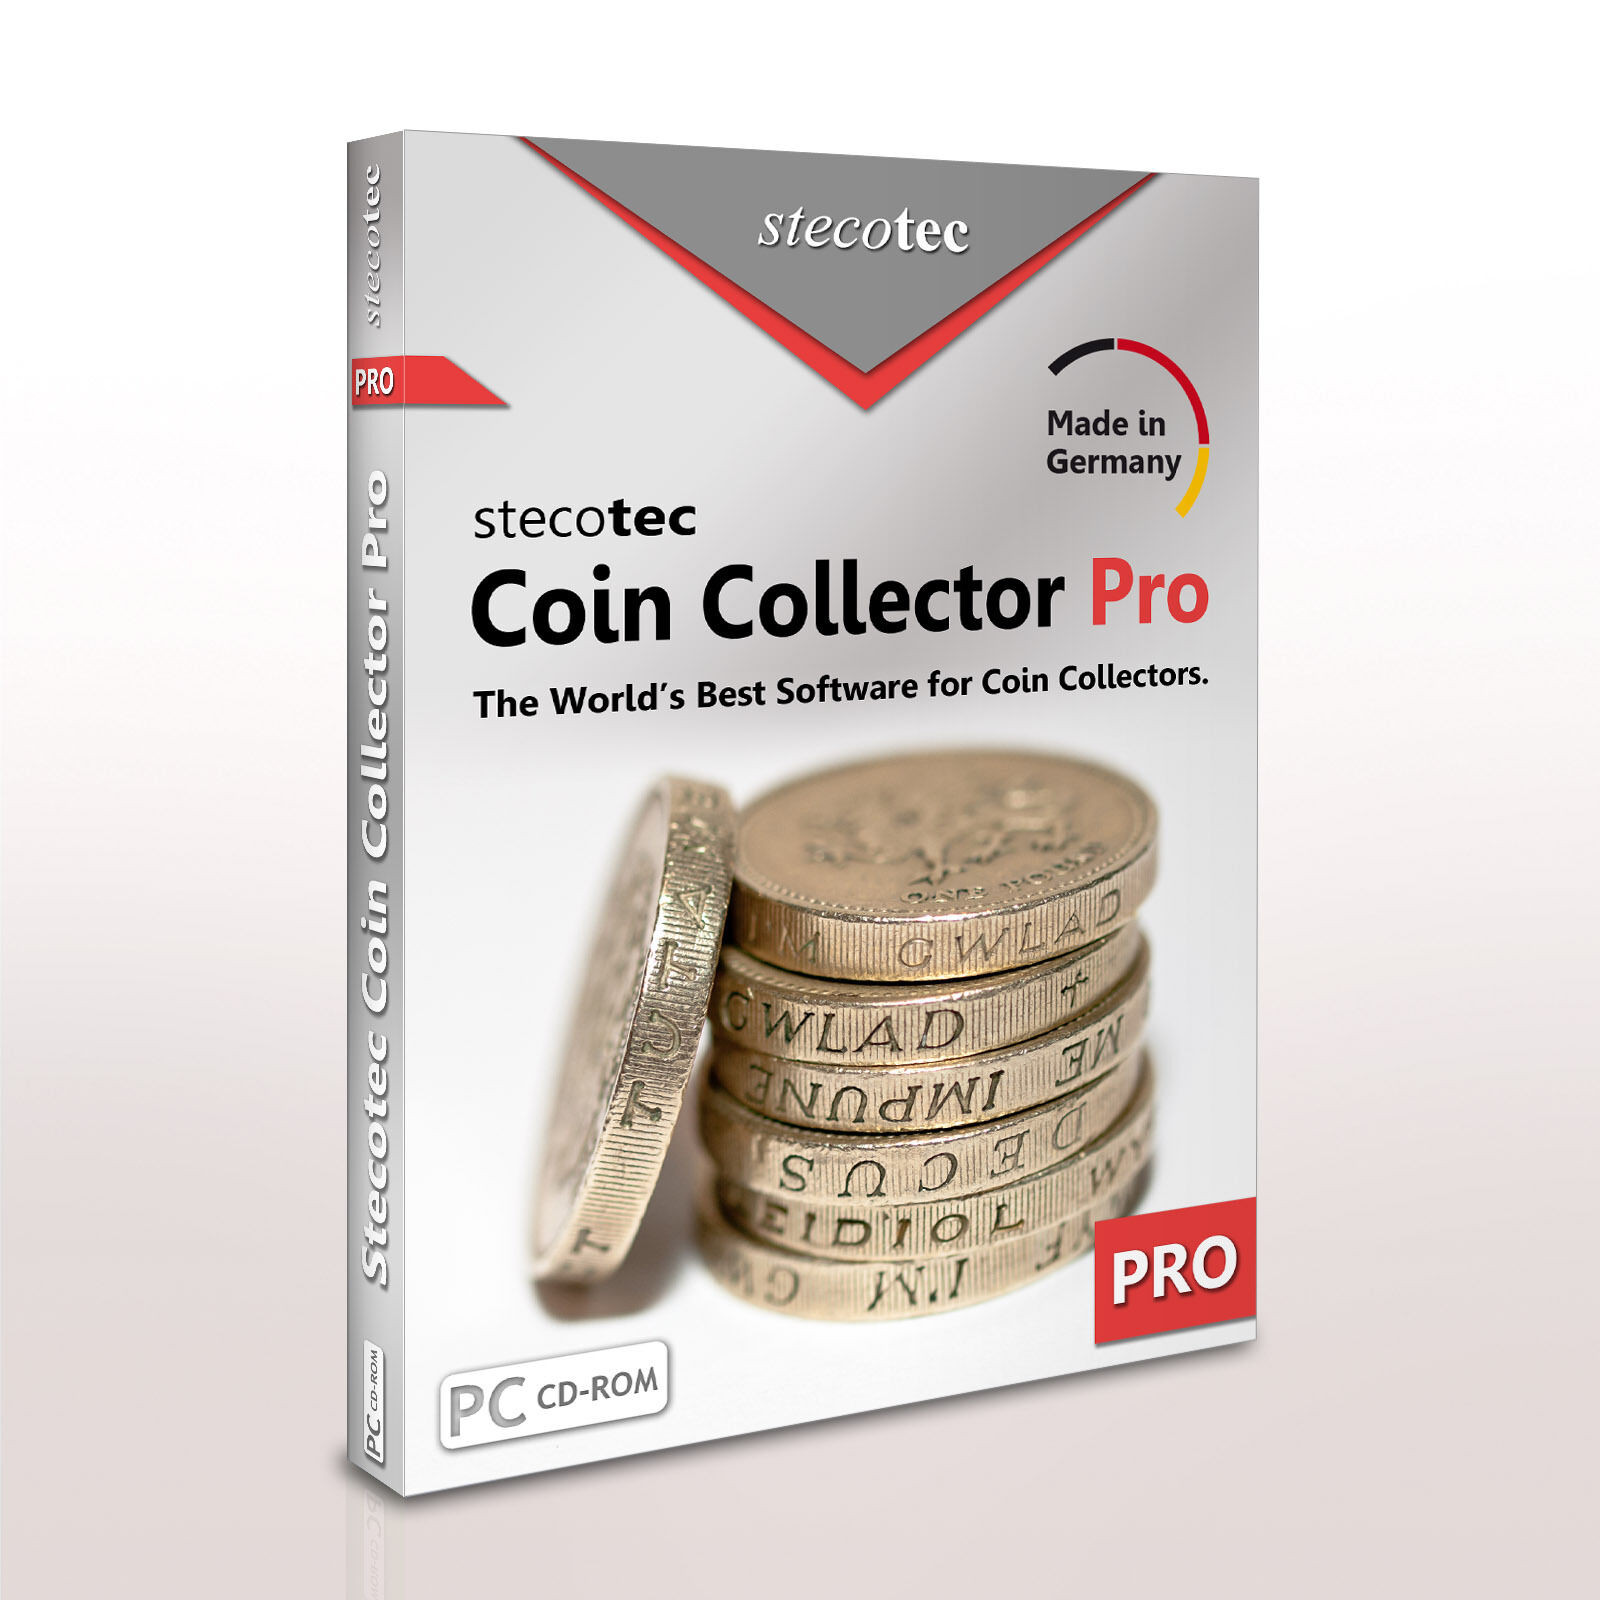 Stecotec Coin Collector Pro - Management Software for Coins / Numismatic Program